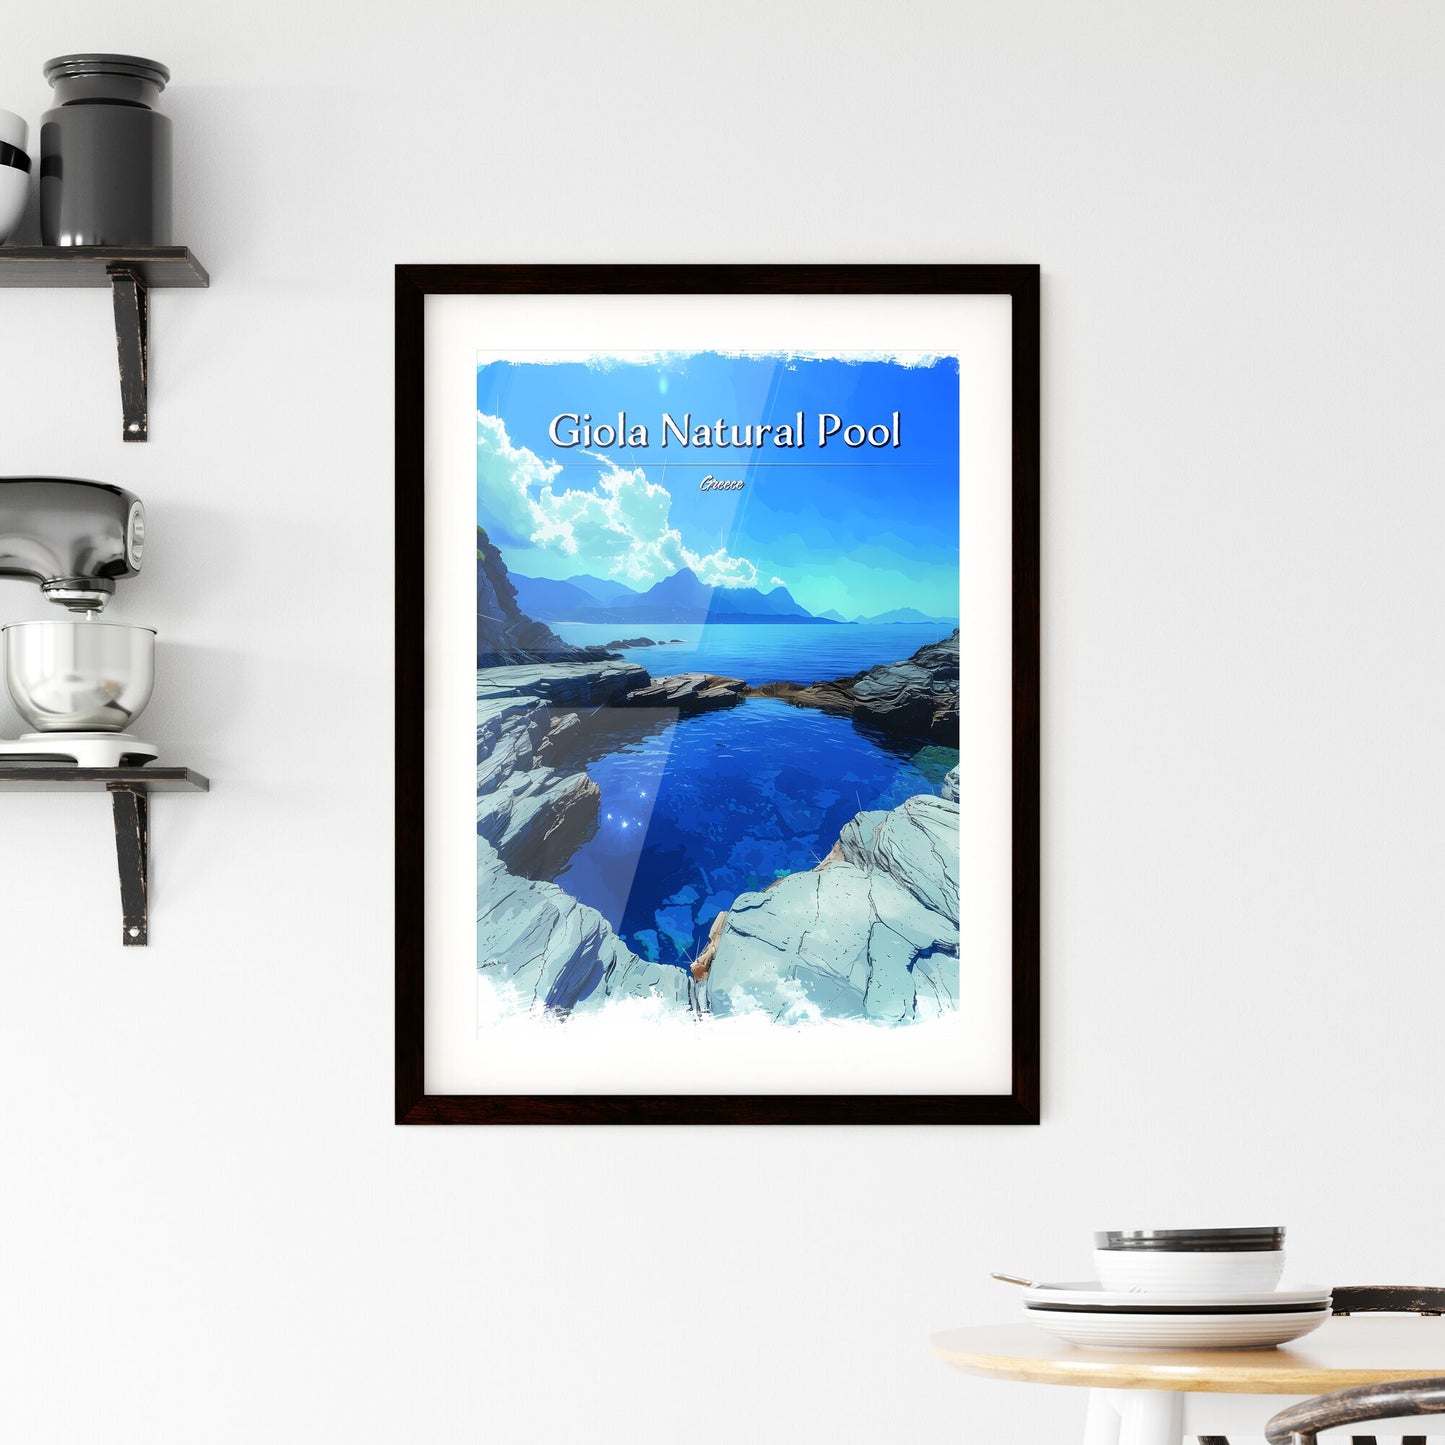 Giola Natural Pool, Greece - Art print of a blue water in a body of water Default Title